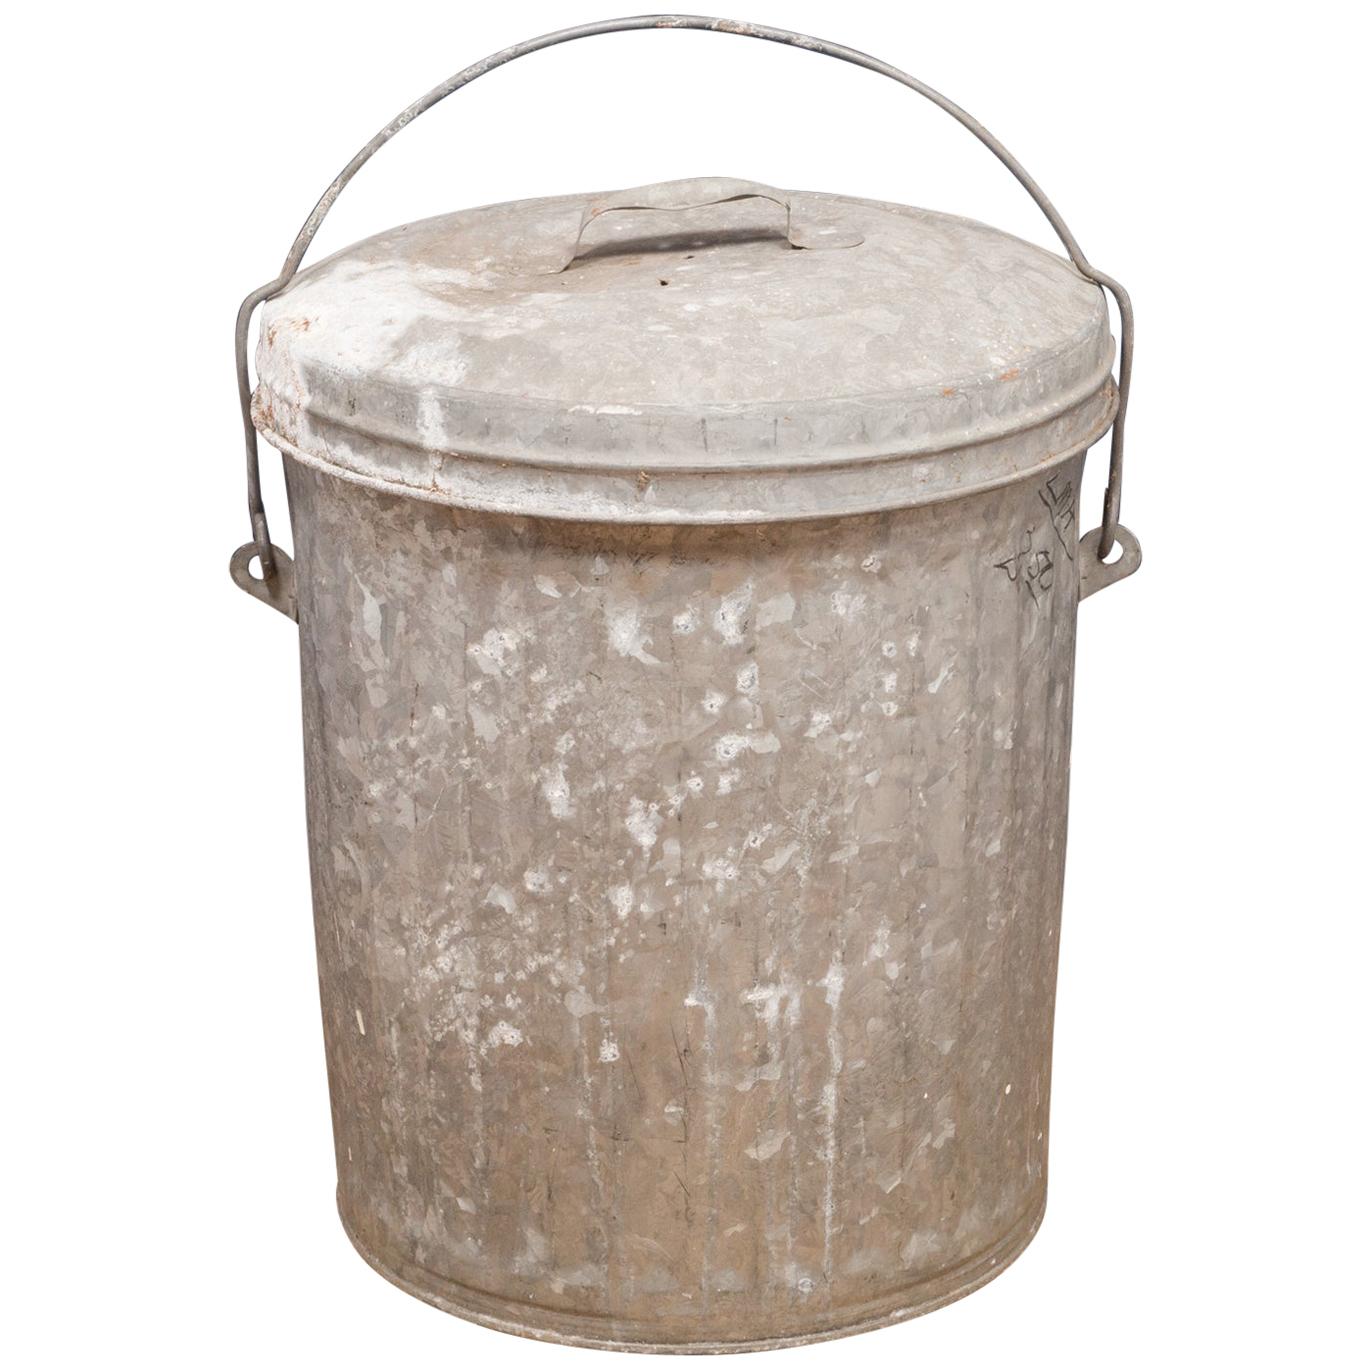 Antique Small Galvanized Steel Trash Can with Handle, circa 1940